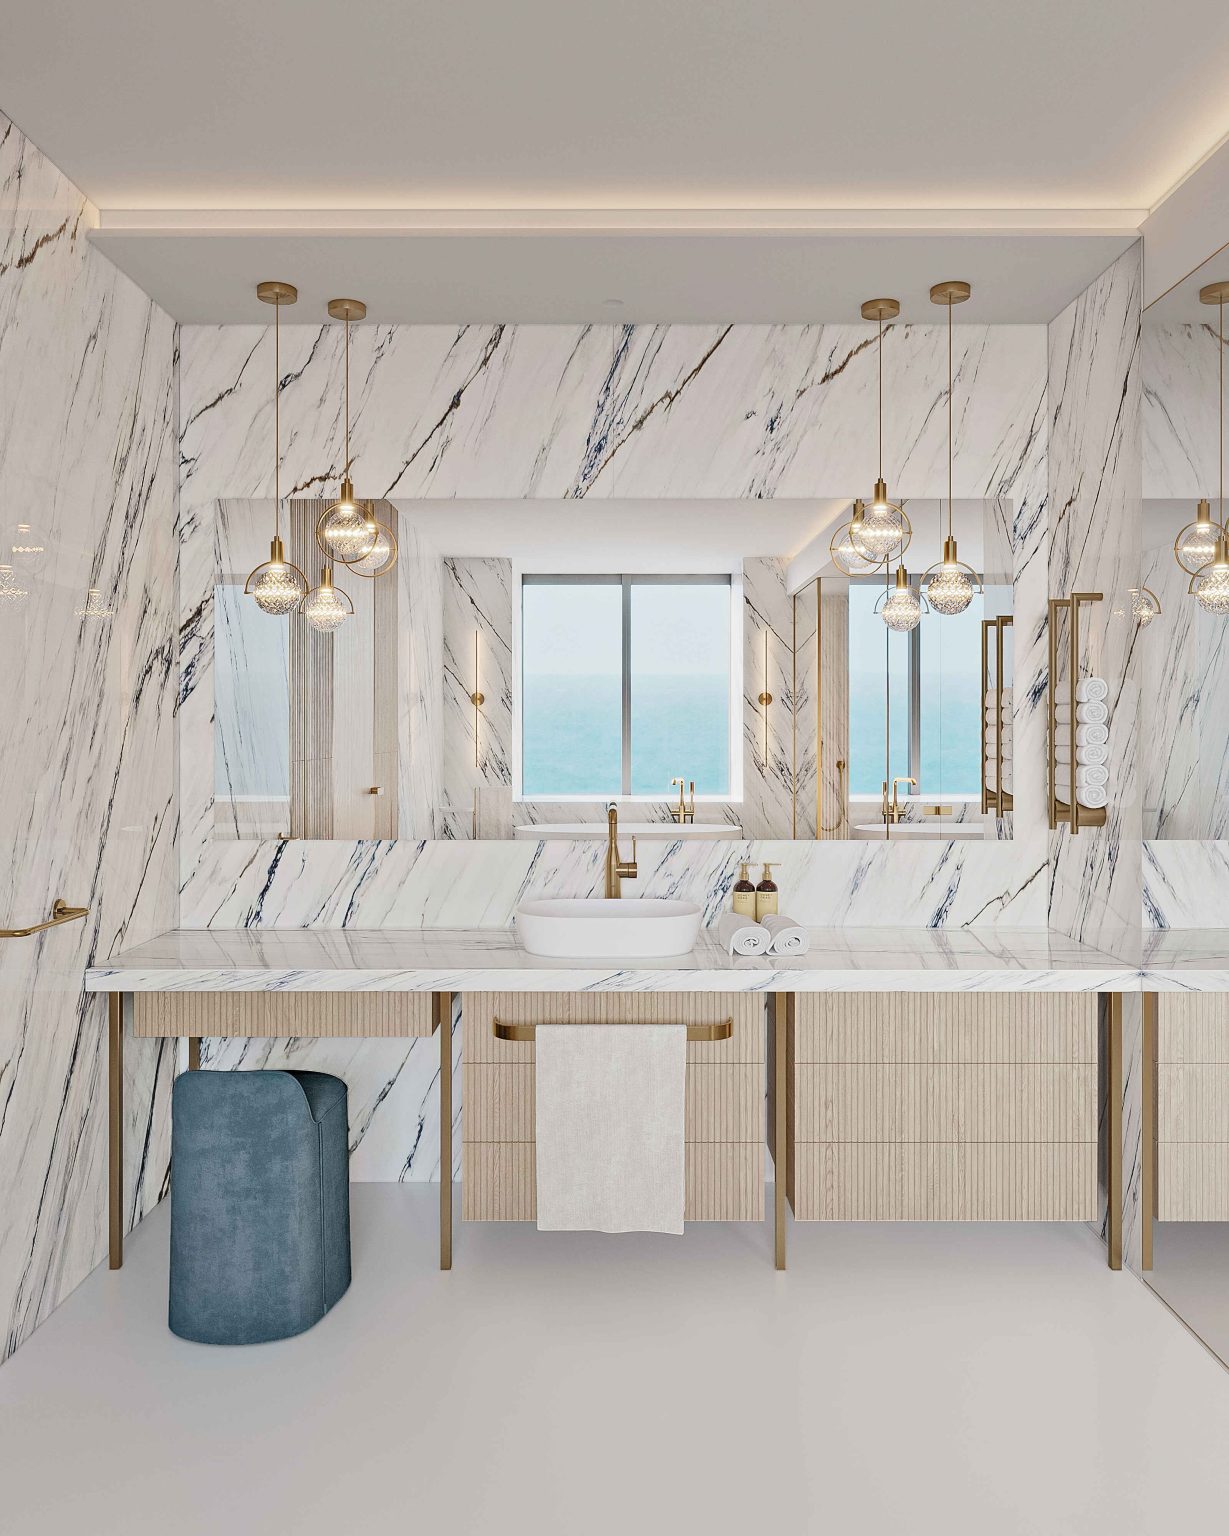 A modern spa-inspired bathroom designed by Natalia Starinova, offering relaxation and luxury in Miami